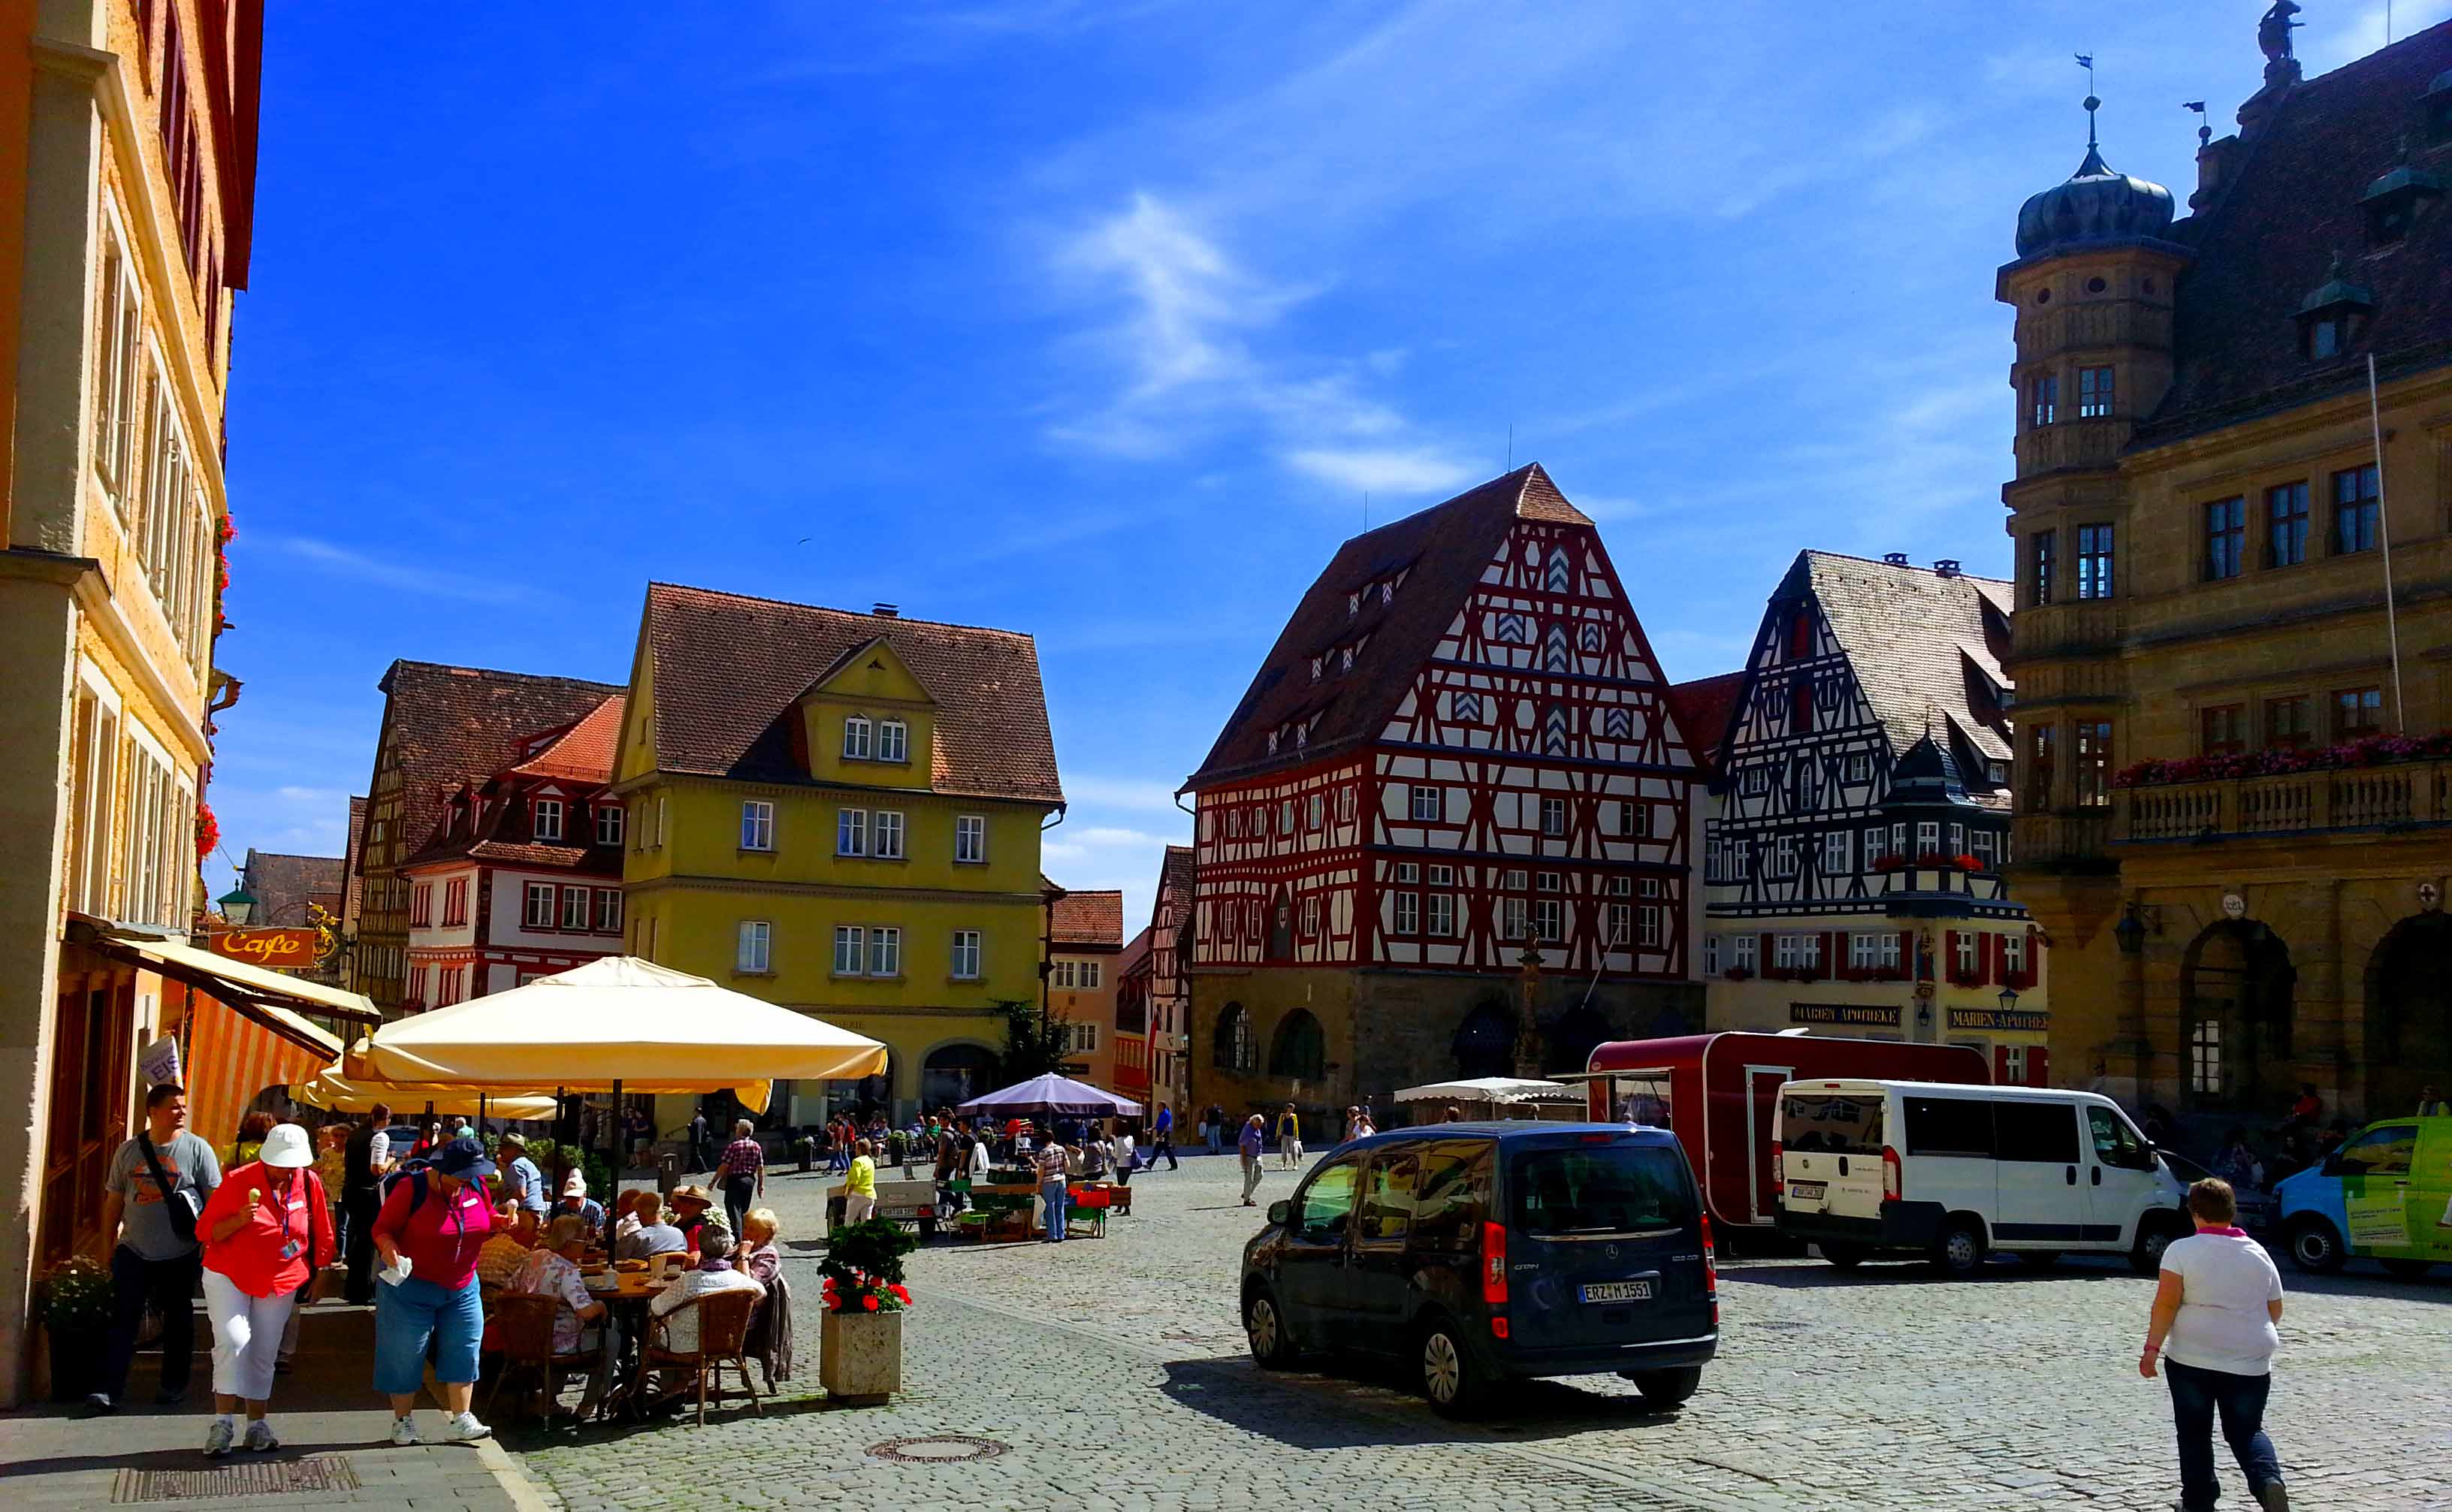 Town square in old town, Rotherburg